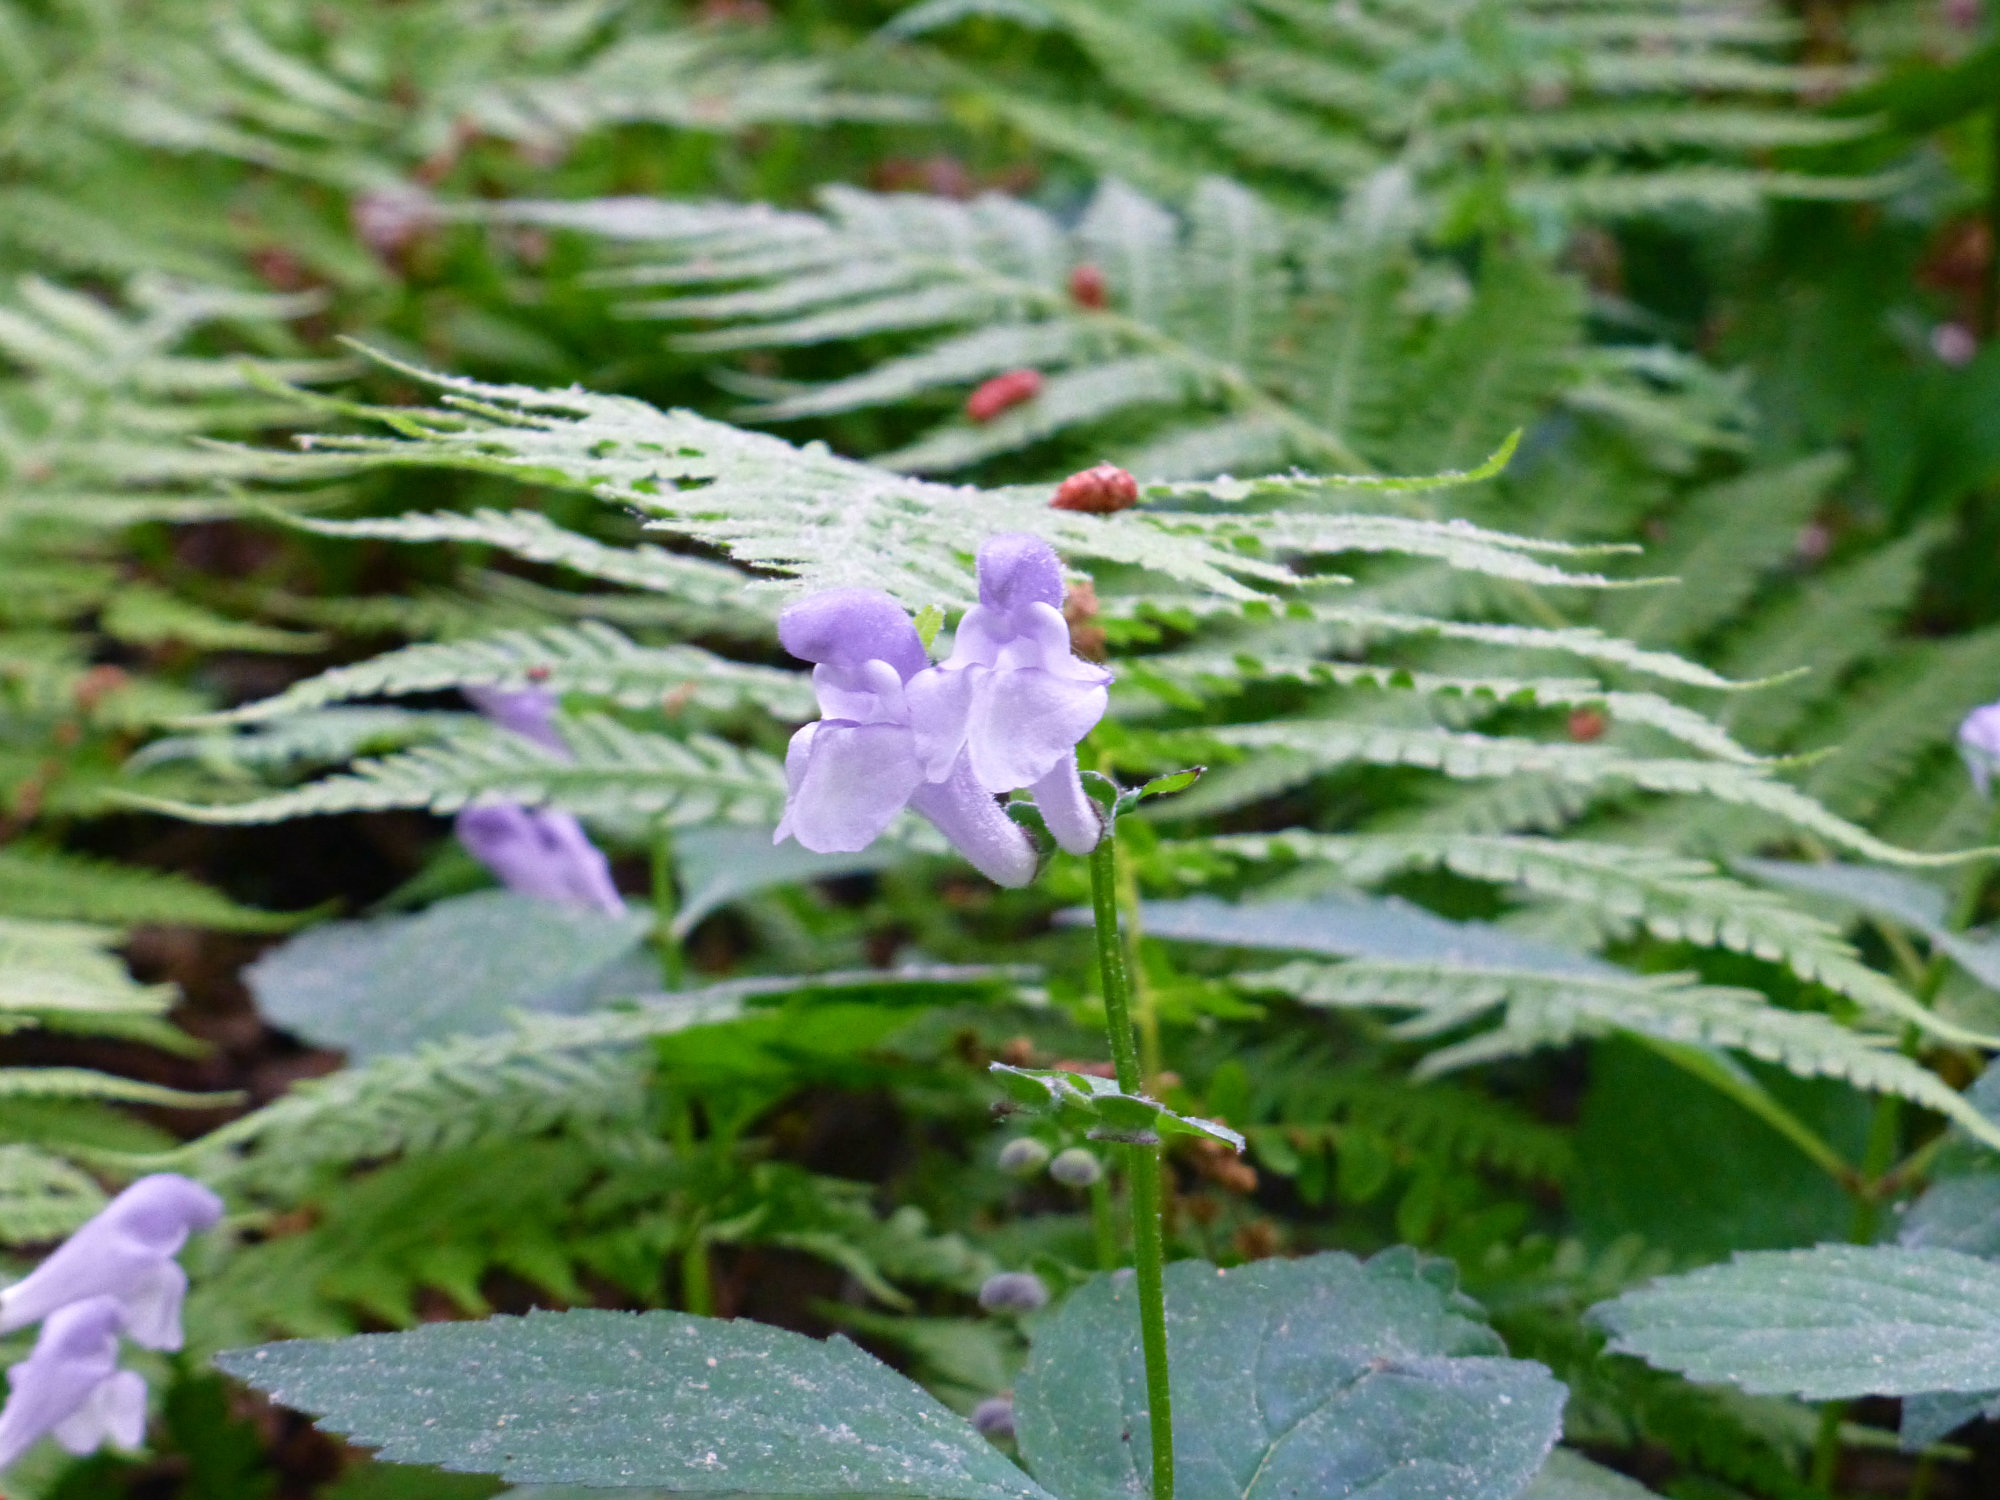 Close up of a two purple flowers on the end of a stem with fern foliage in the background